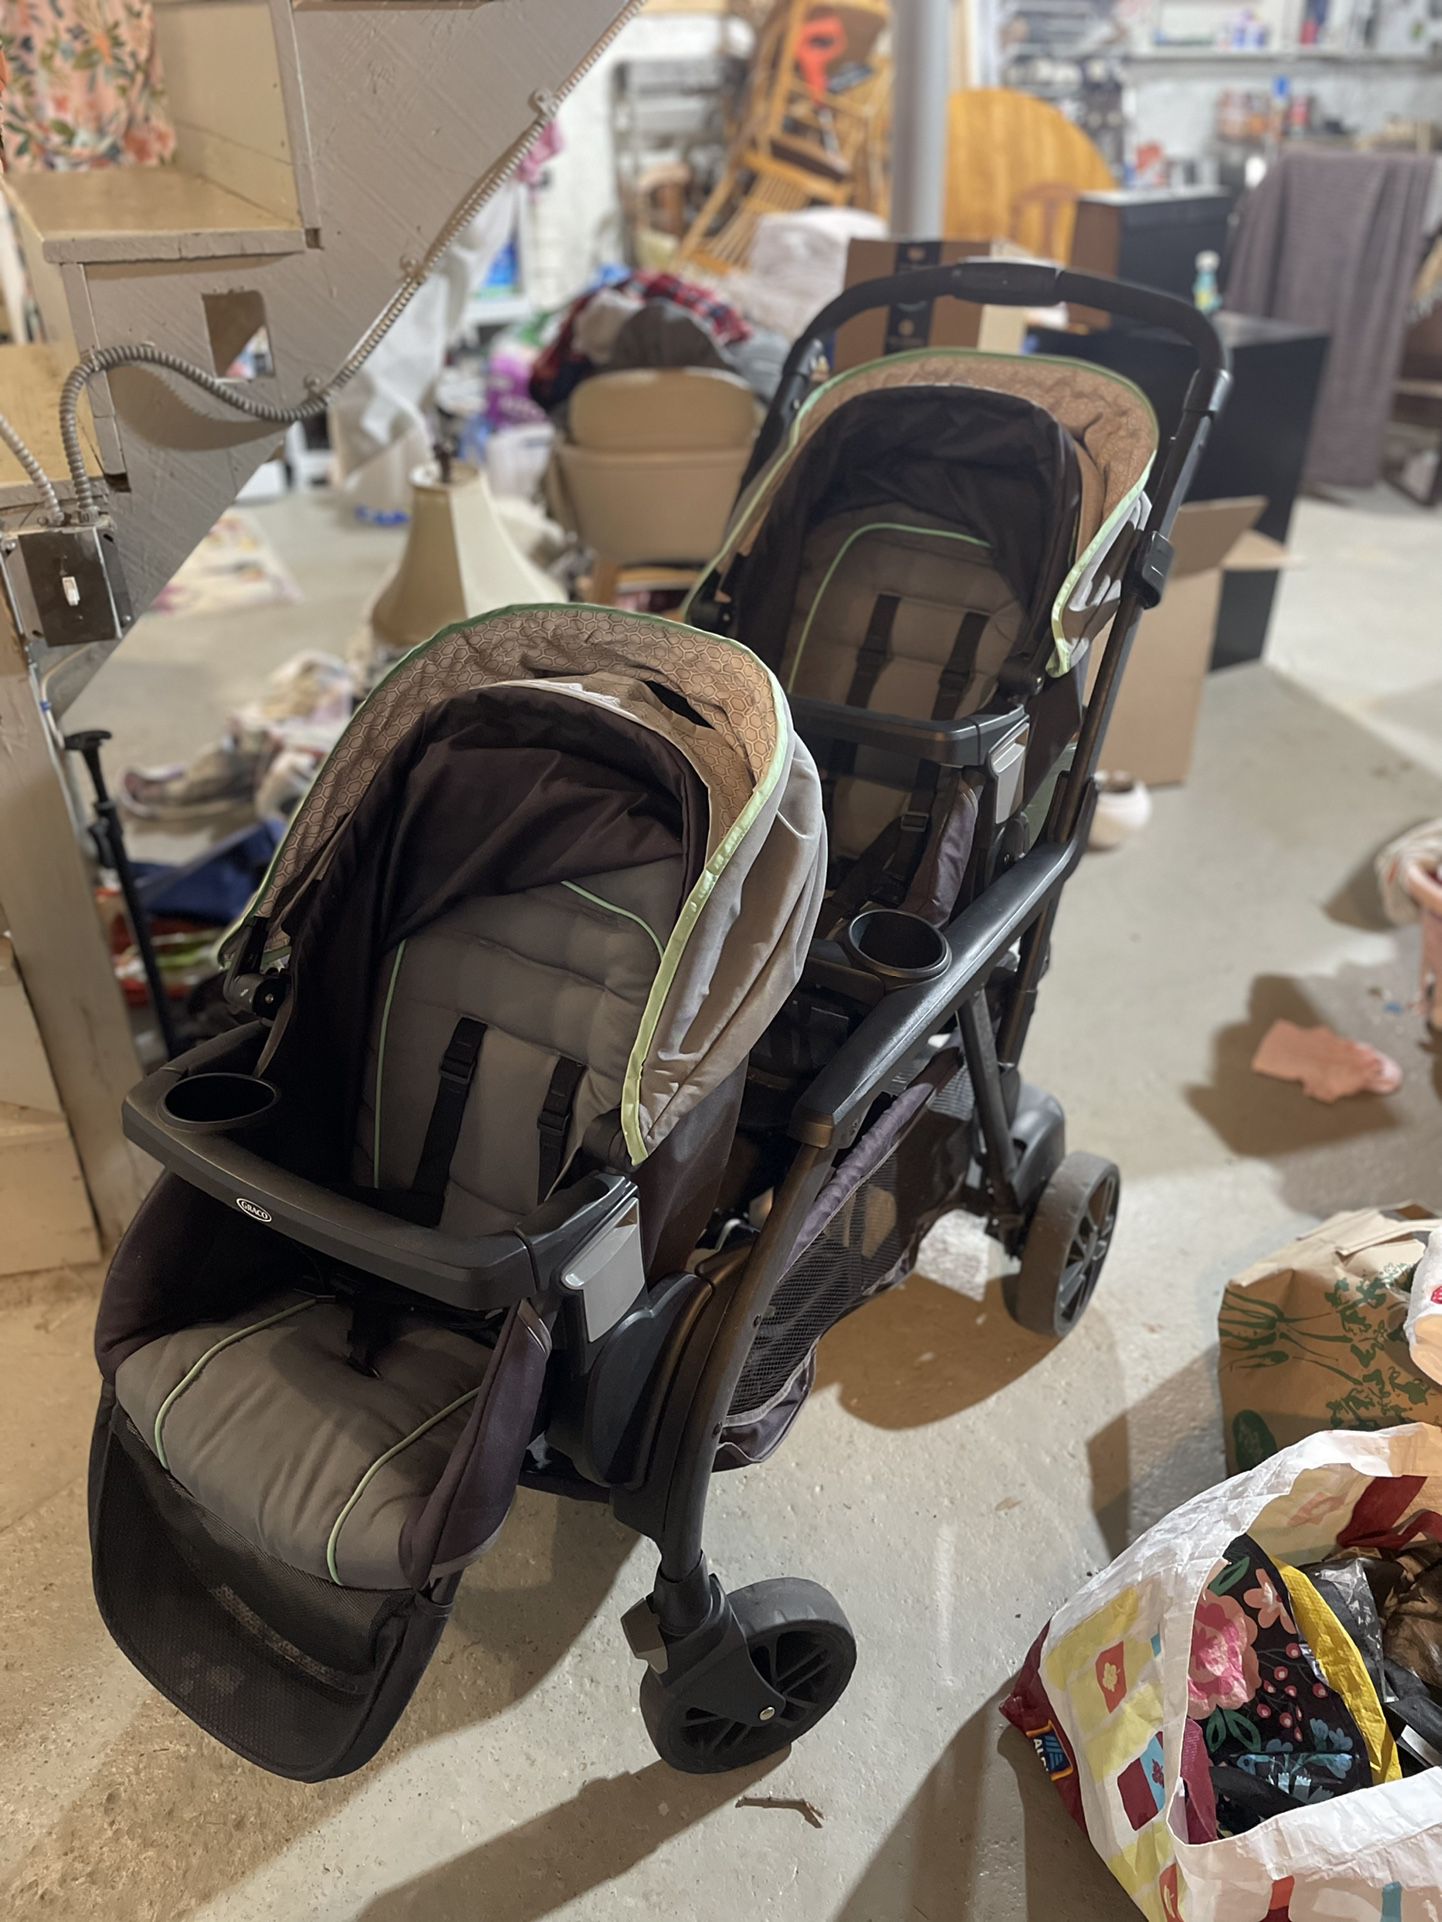 Graco Double Stroller - Used, Good Condition